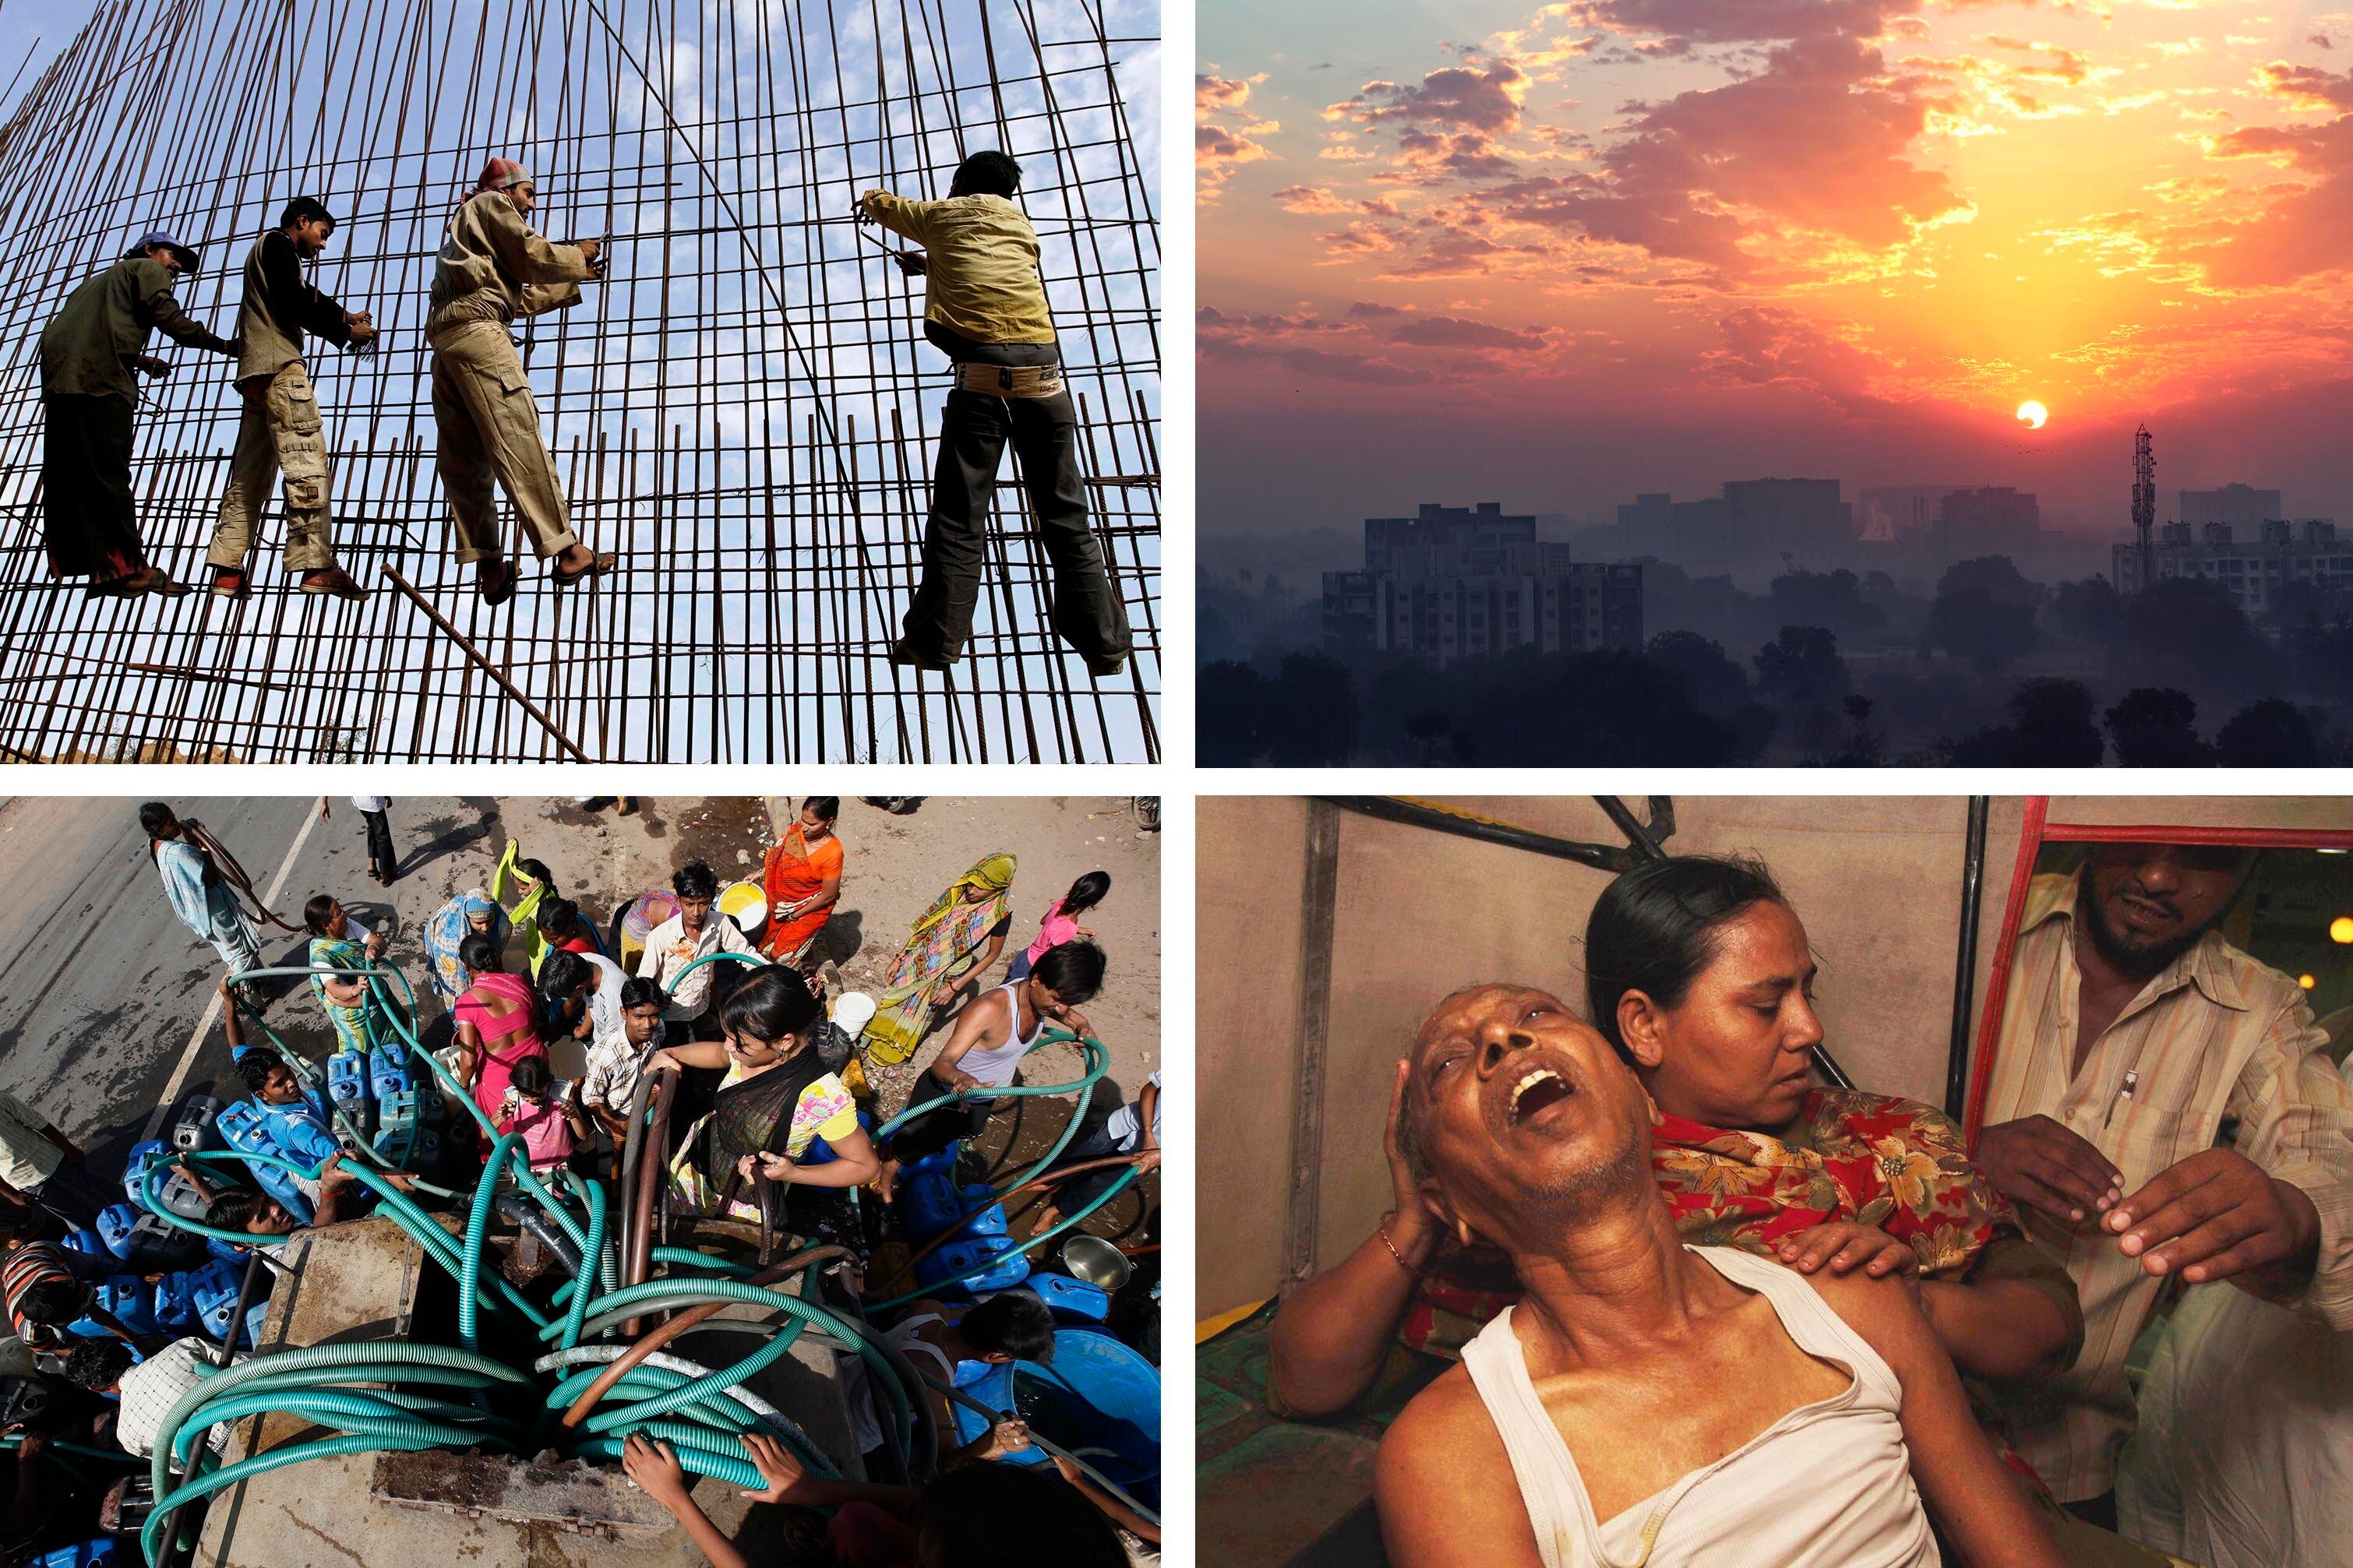 Top left: Laborers at a construction site in Ahmedabad, India, in January 2012. Top right: The Ahmedabad skyline as day breaks. Bottom left: People in Ahmedabad crowd around a water tanker to fill their containers in April 2010. Bottom right: A patient suffering from extreme heat in Ahmedabad in May 2010. Credit: Reuters/AP/Getty Images